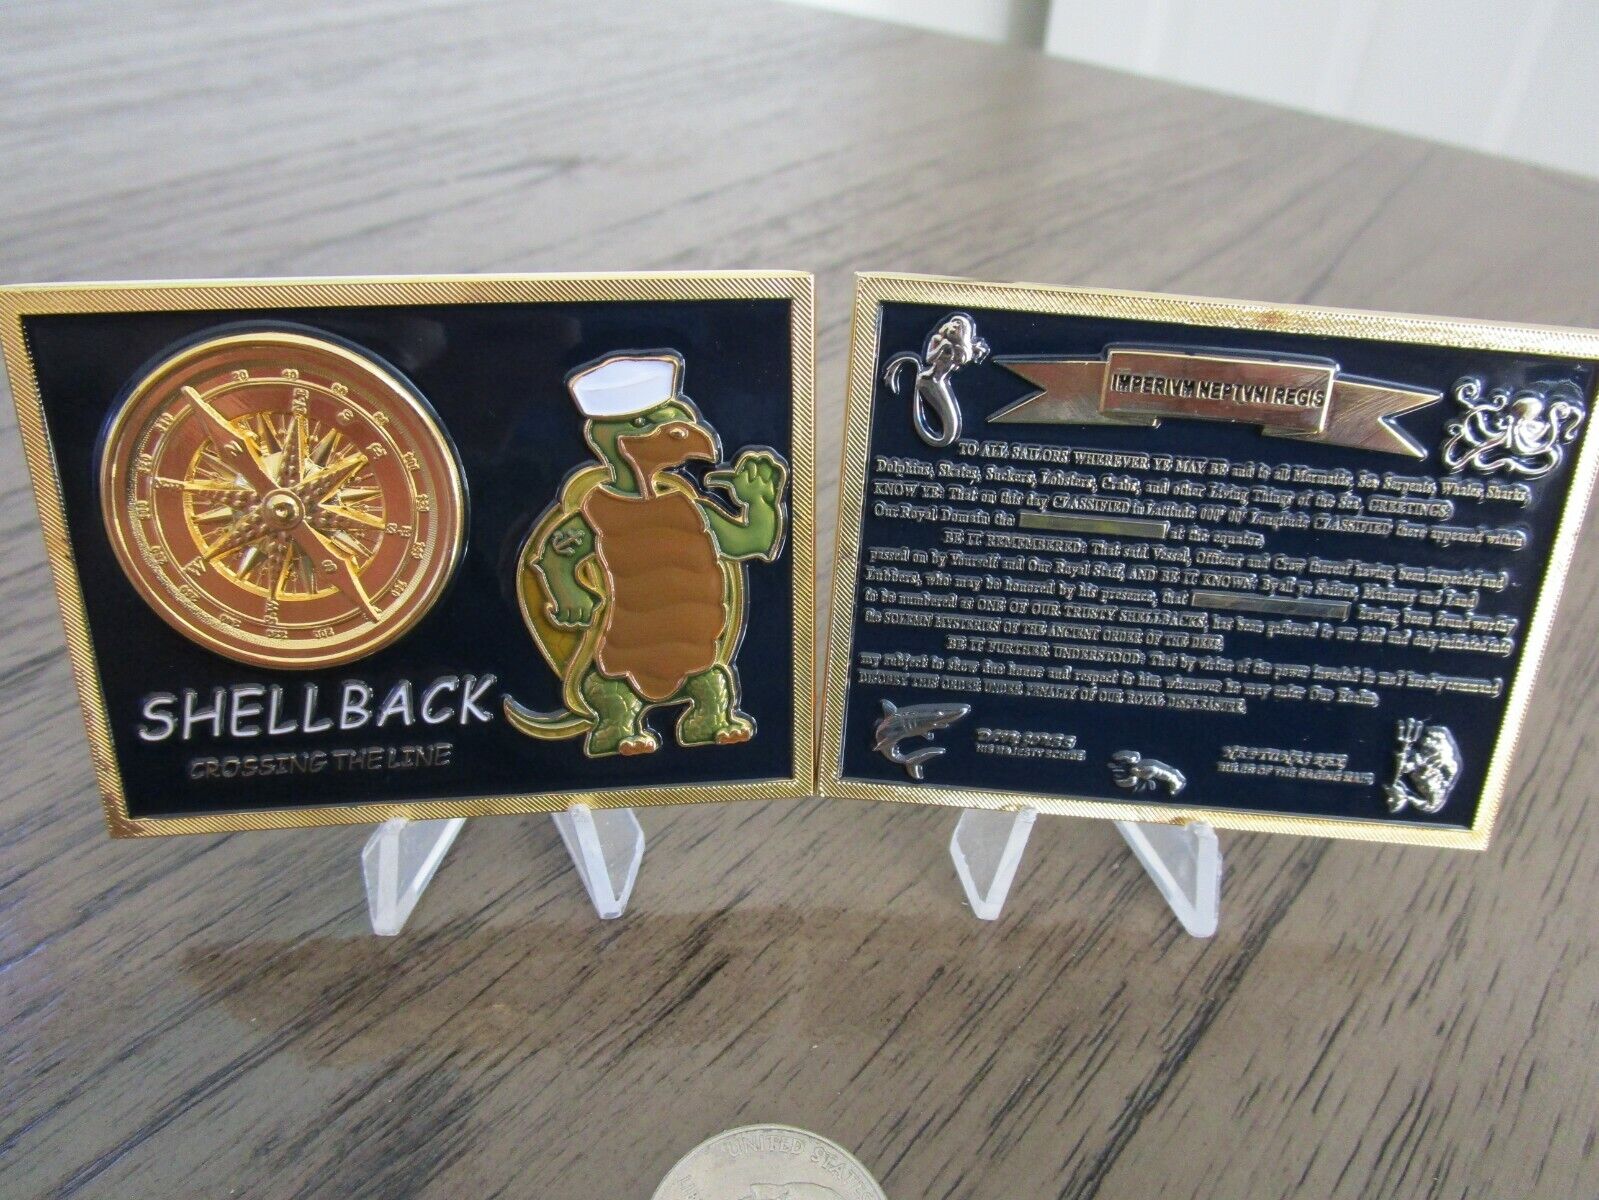 Shellback Crossing The Line Ancient Order of the Deep USN Challenge Coin